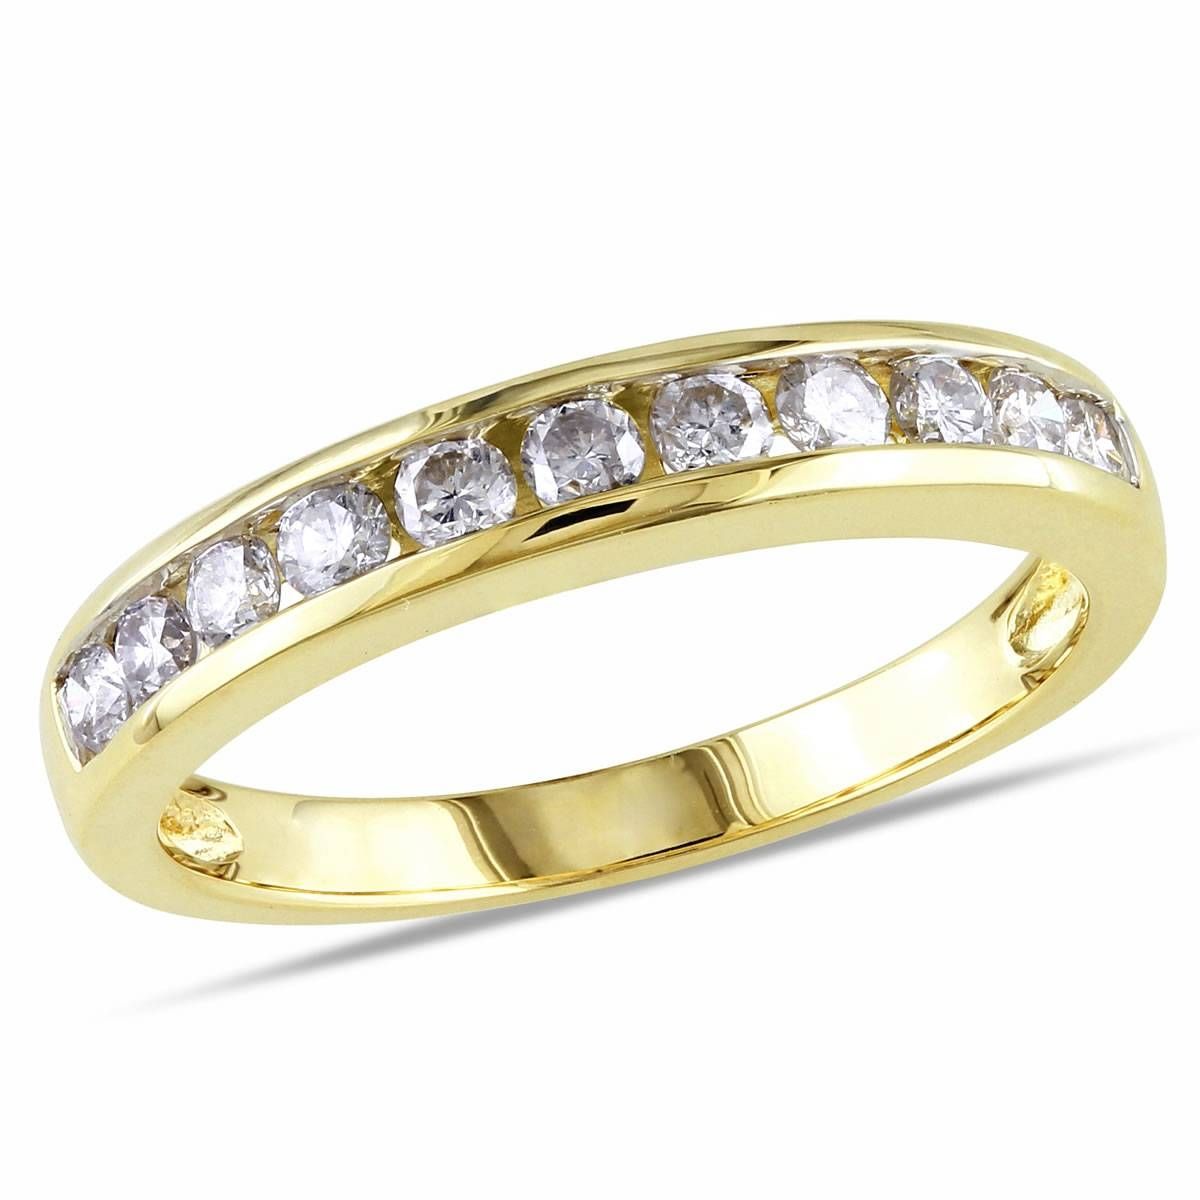 10k Yellow Gold 1/2 Ct Diamond Tw Eternity Anniversary Ring, Gh I2 Throughout Most Popular Yellow Gold Diamond Anniversary Rings (View 2 of 25)